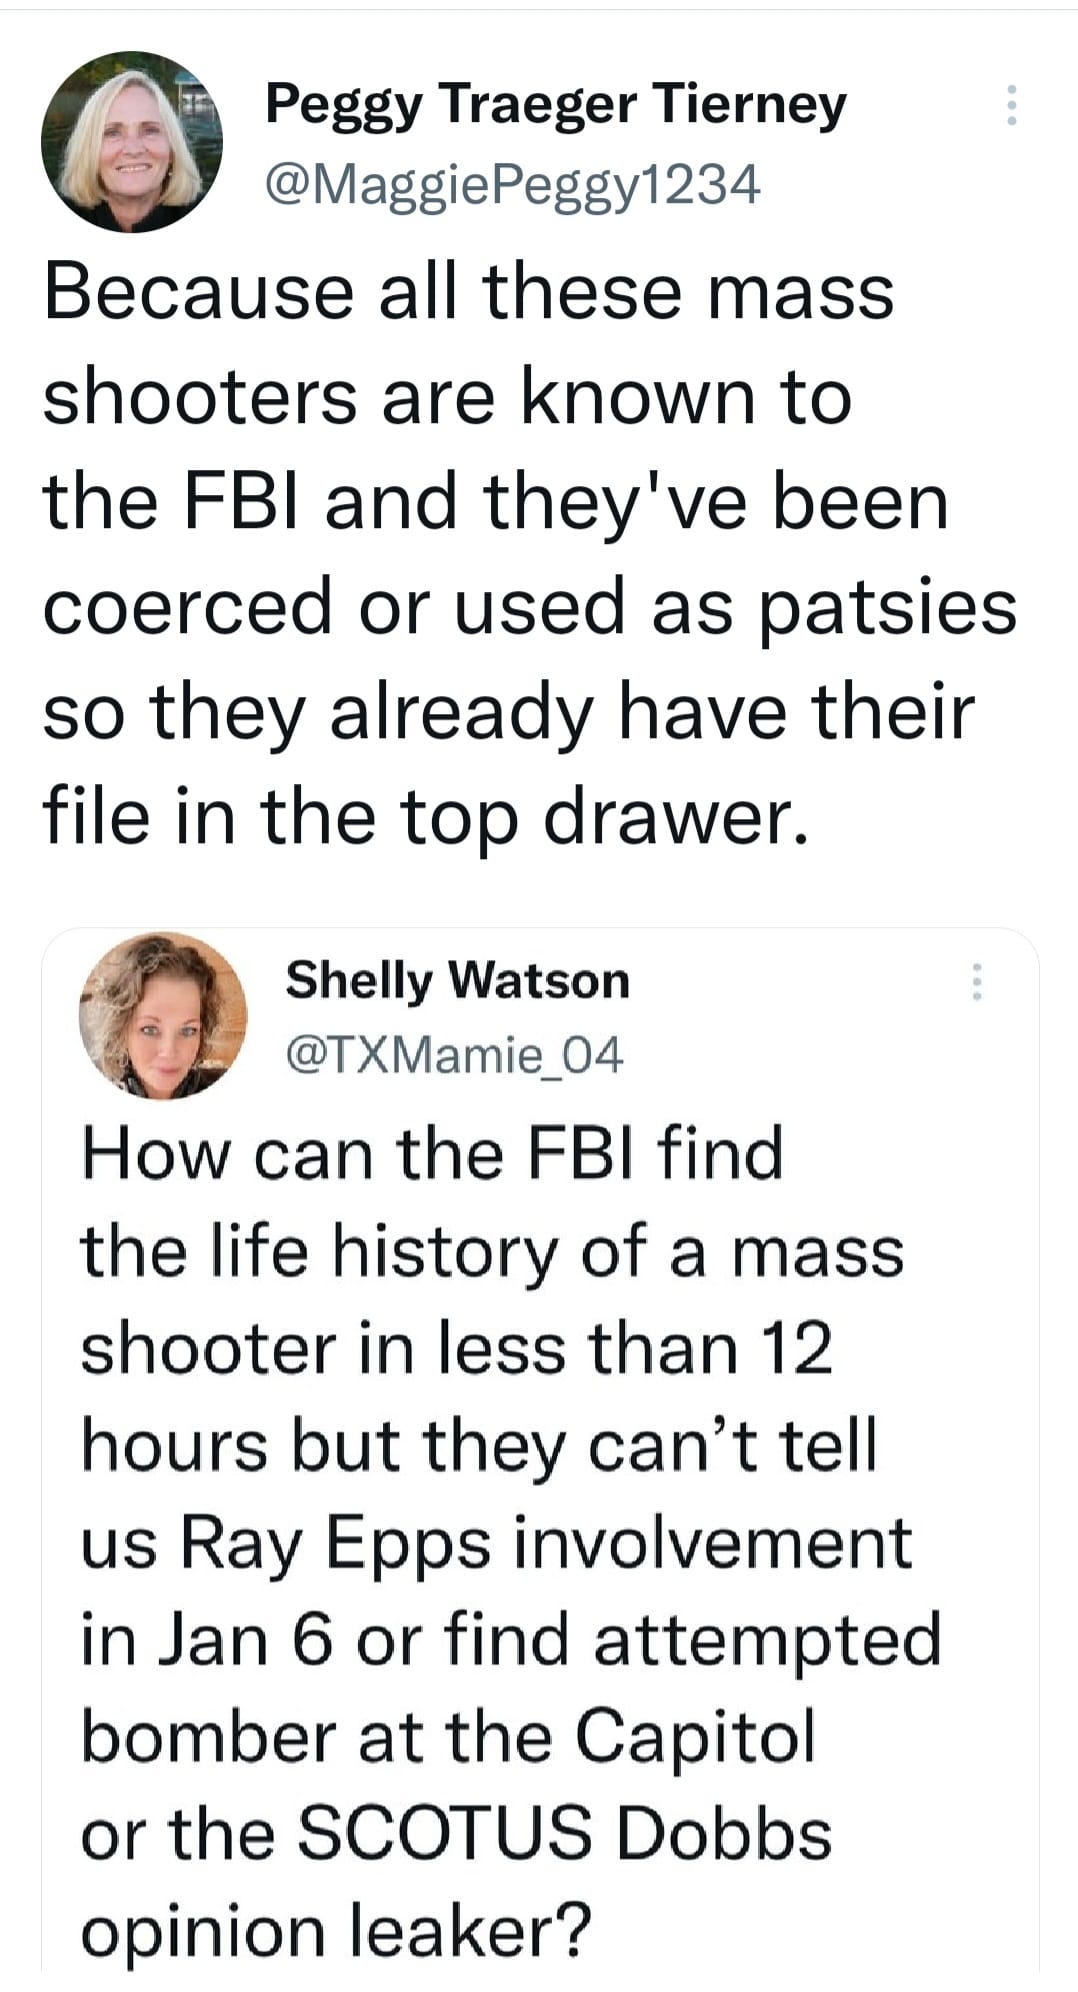 May be a Twitter screenshot of 2 people and text that says 'Peggy Traeger Tierney @MaggiePeggy1234 Because all these mass shooters are known to the FBI and they've been coerced or used as patsies so they already have their file in the top drawer. Shelly Watson @TXMamie_0 How can the FBI find the life history of a mass shooter in less than 12 hours but they can't tell us Ray Epps involvement in Jan 6 or find attempted bomber at the Capitol or the SCOTUS Dobbs opinion leaker?'